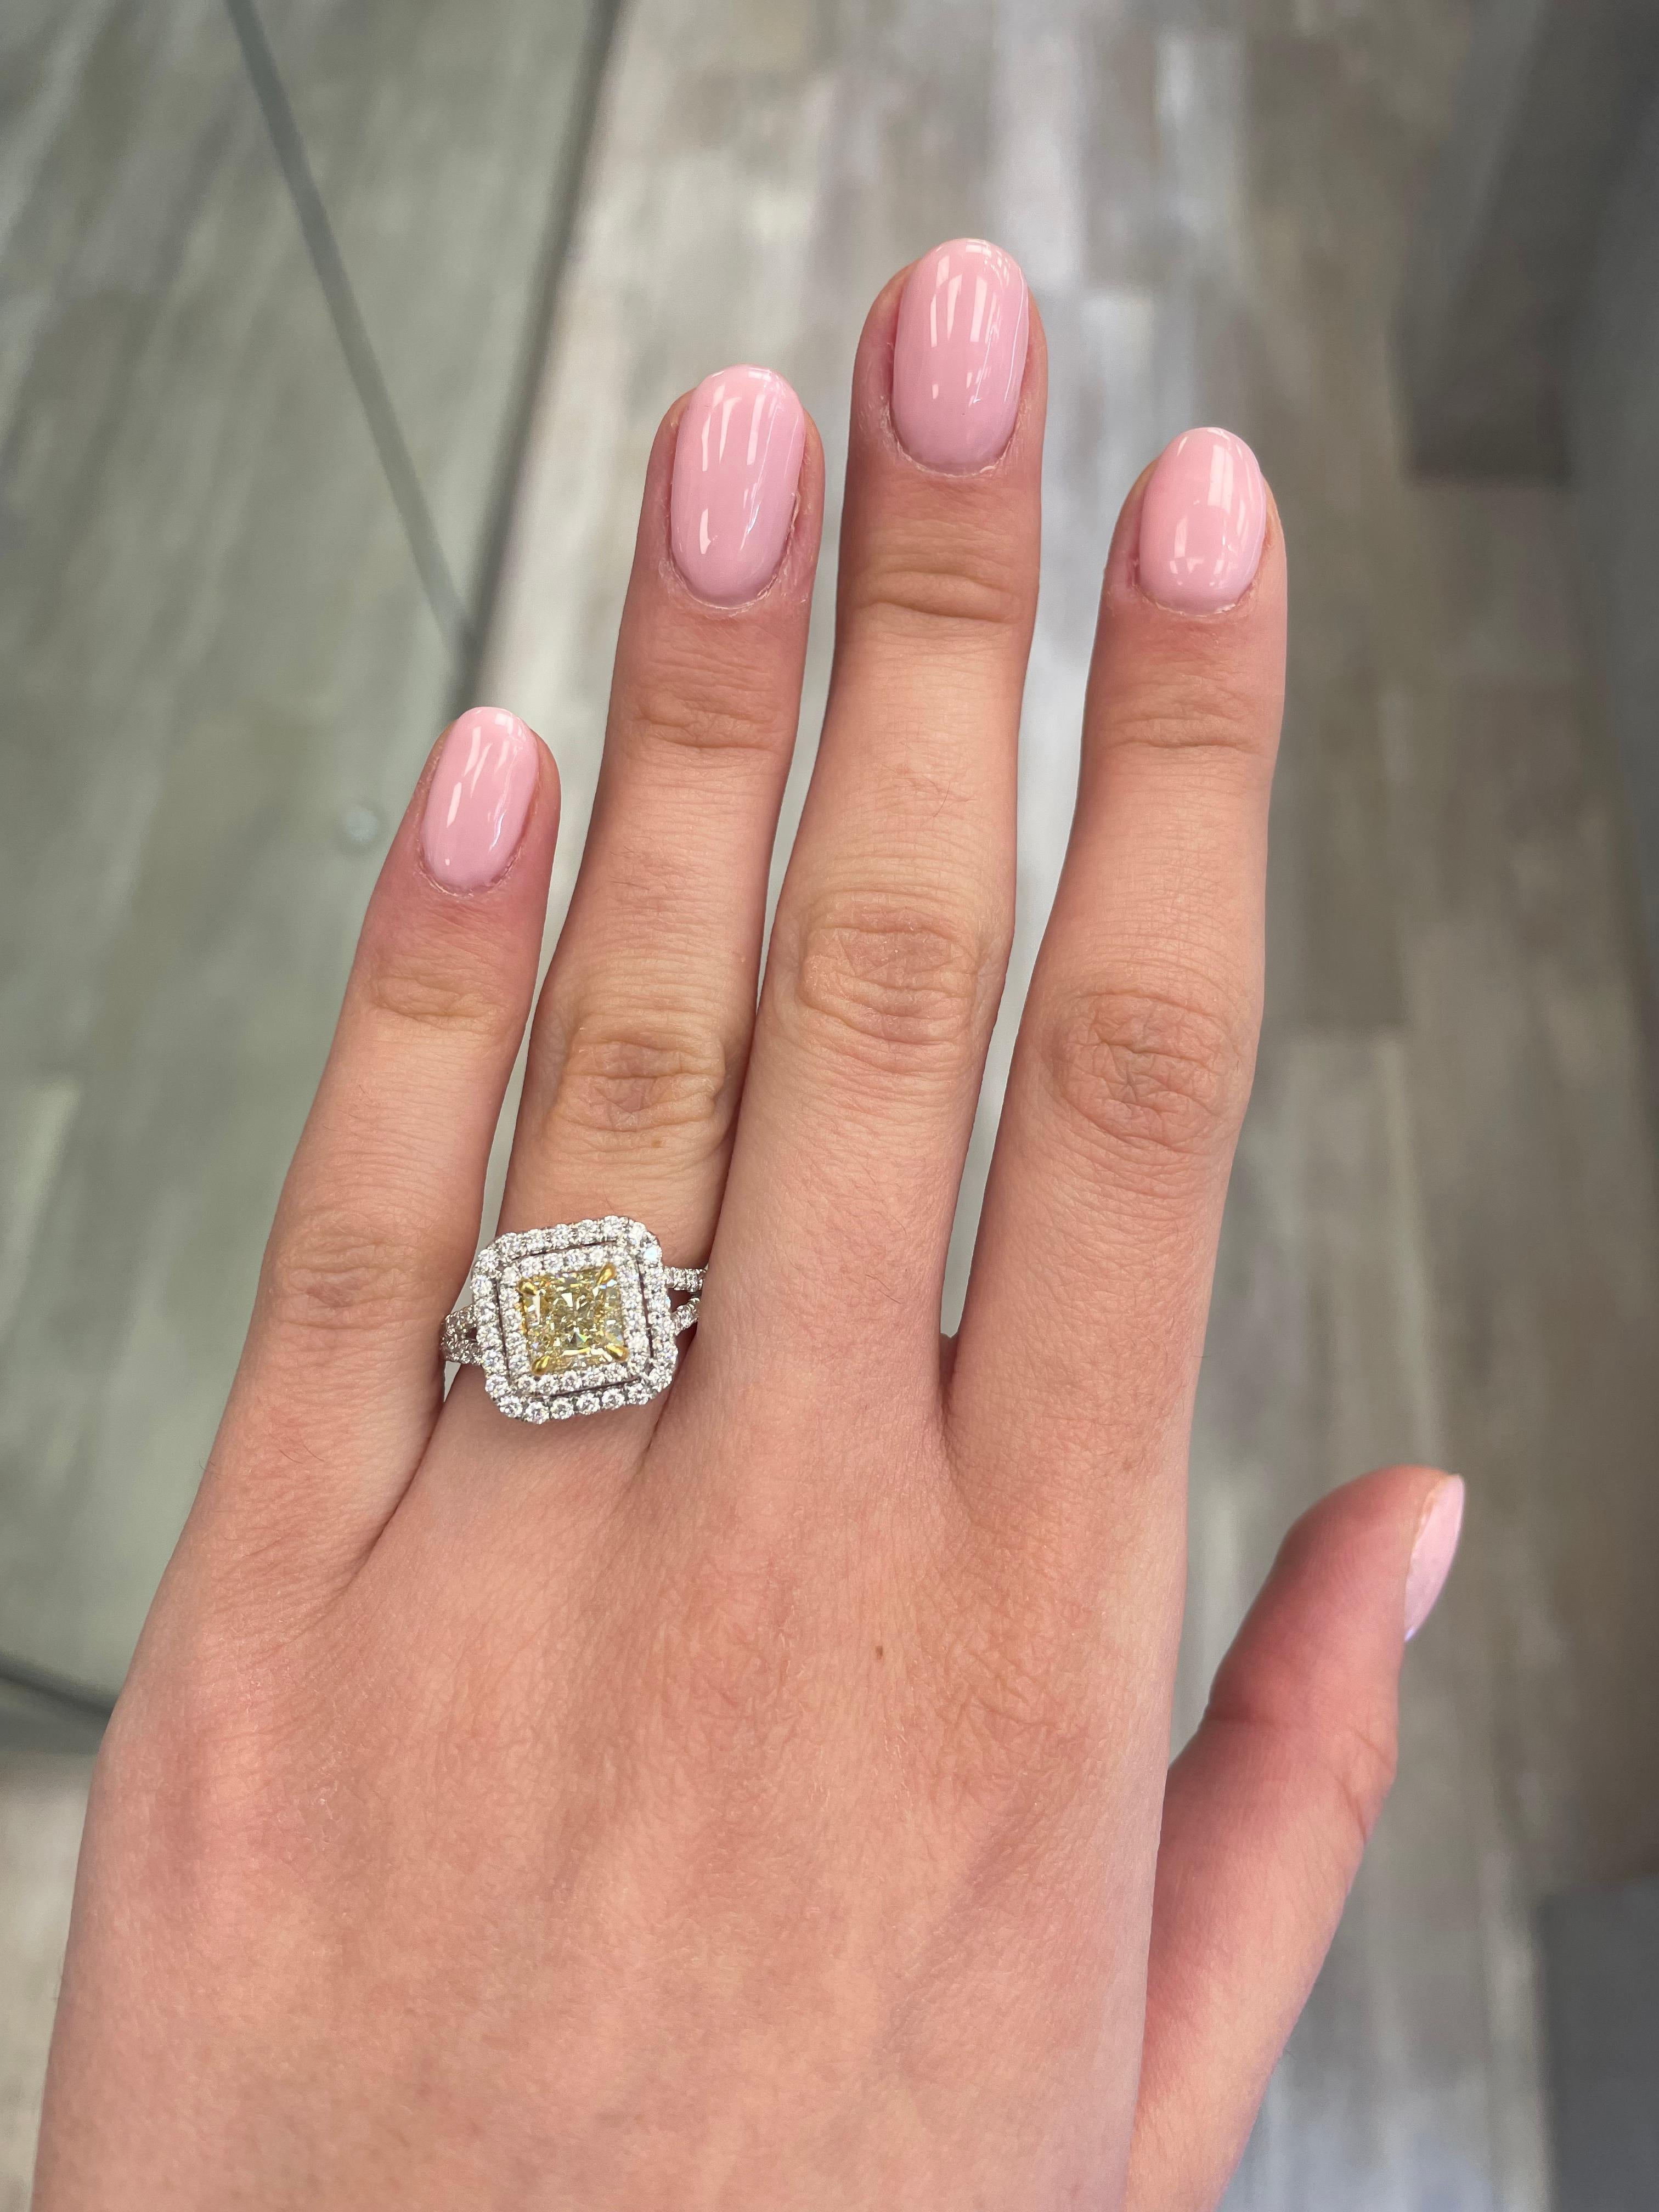 Stunning modern EGL certified fancy yellow diamond double halo ring, two-tone 18k yellow and white gold, split shank. By Alexander Beverly Hills
2.25 carats total diamond weight.
1.52 carat radiant cut Fancy Yellow color and VS1 clarity diamond, EGL